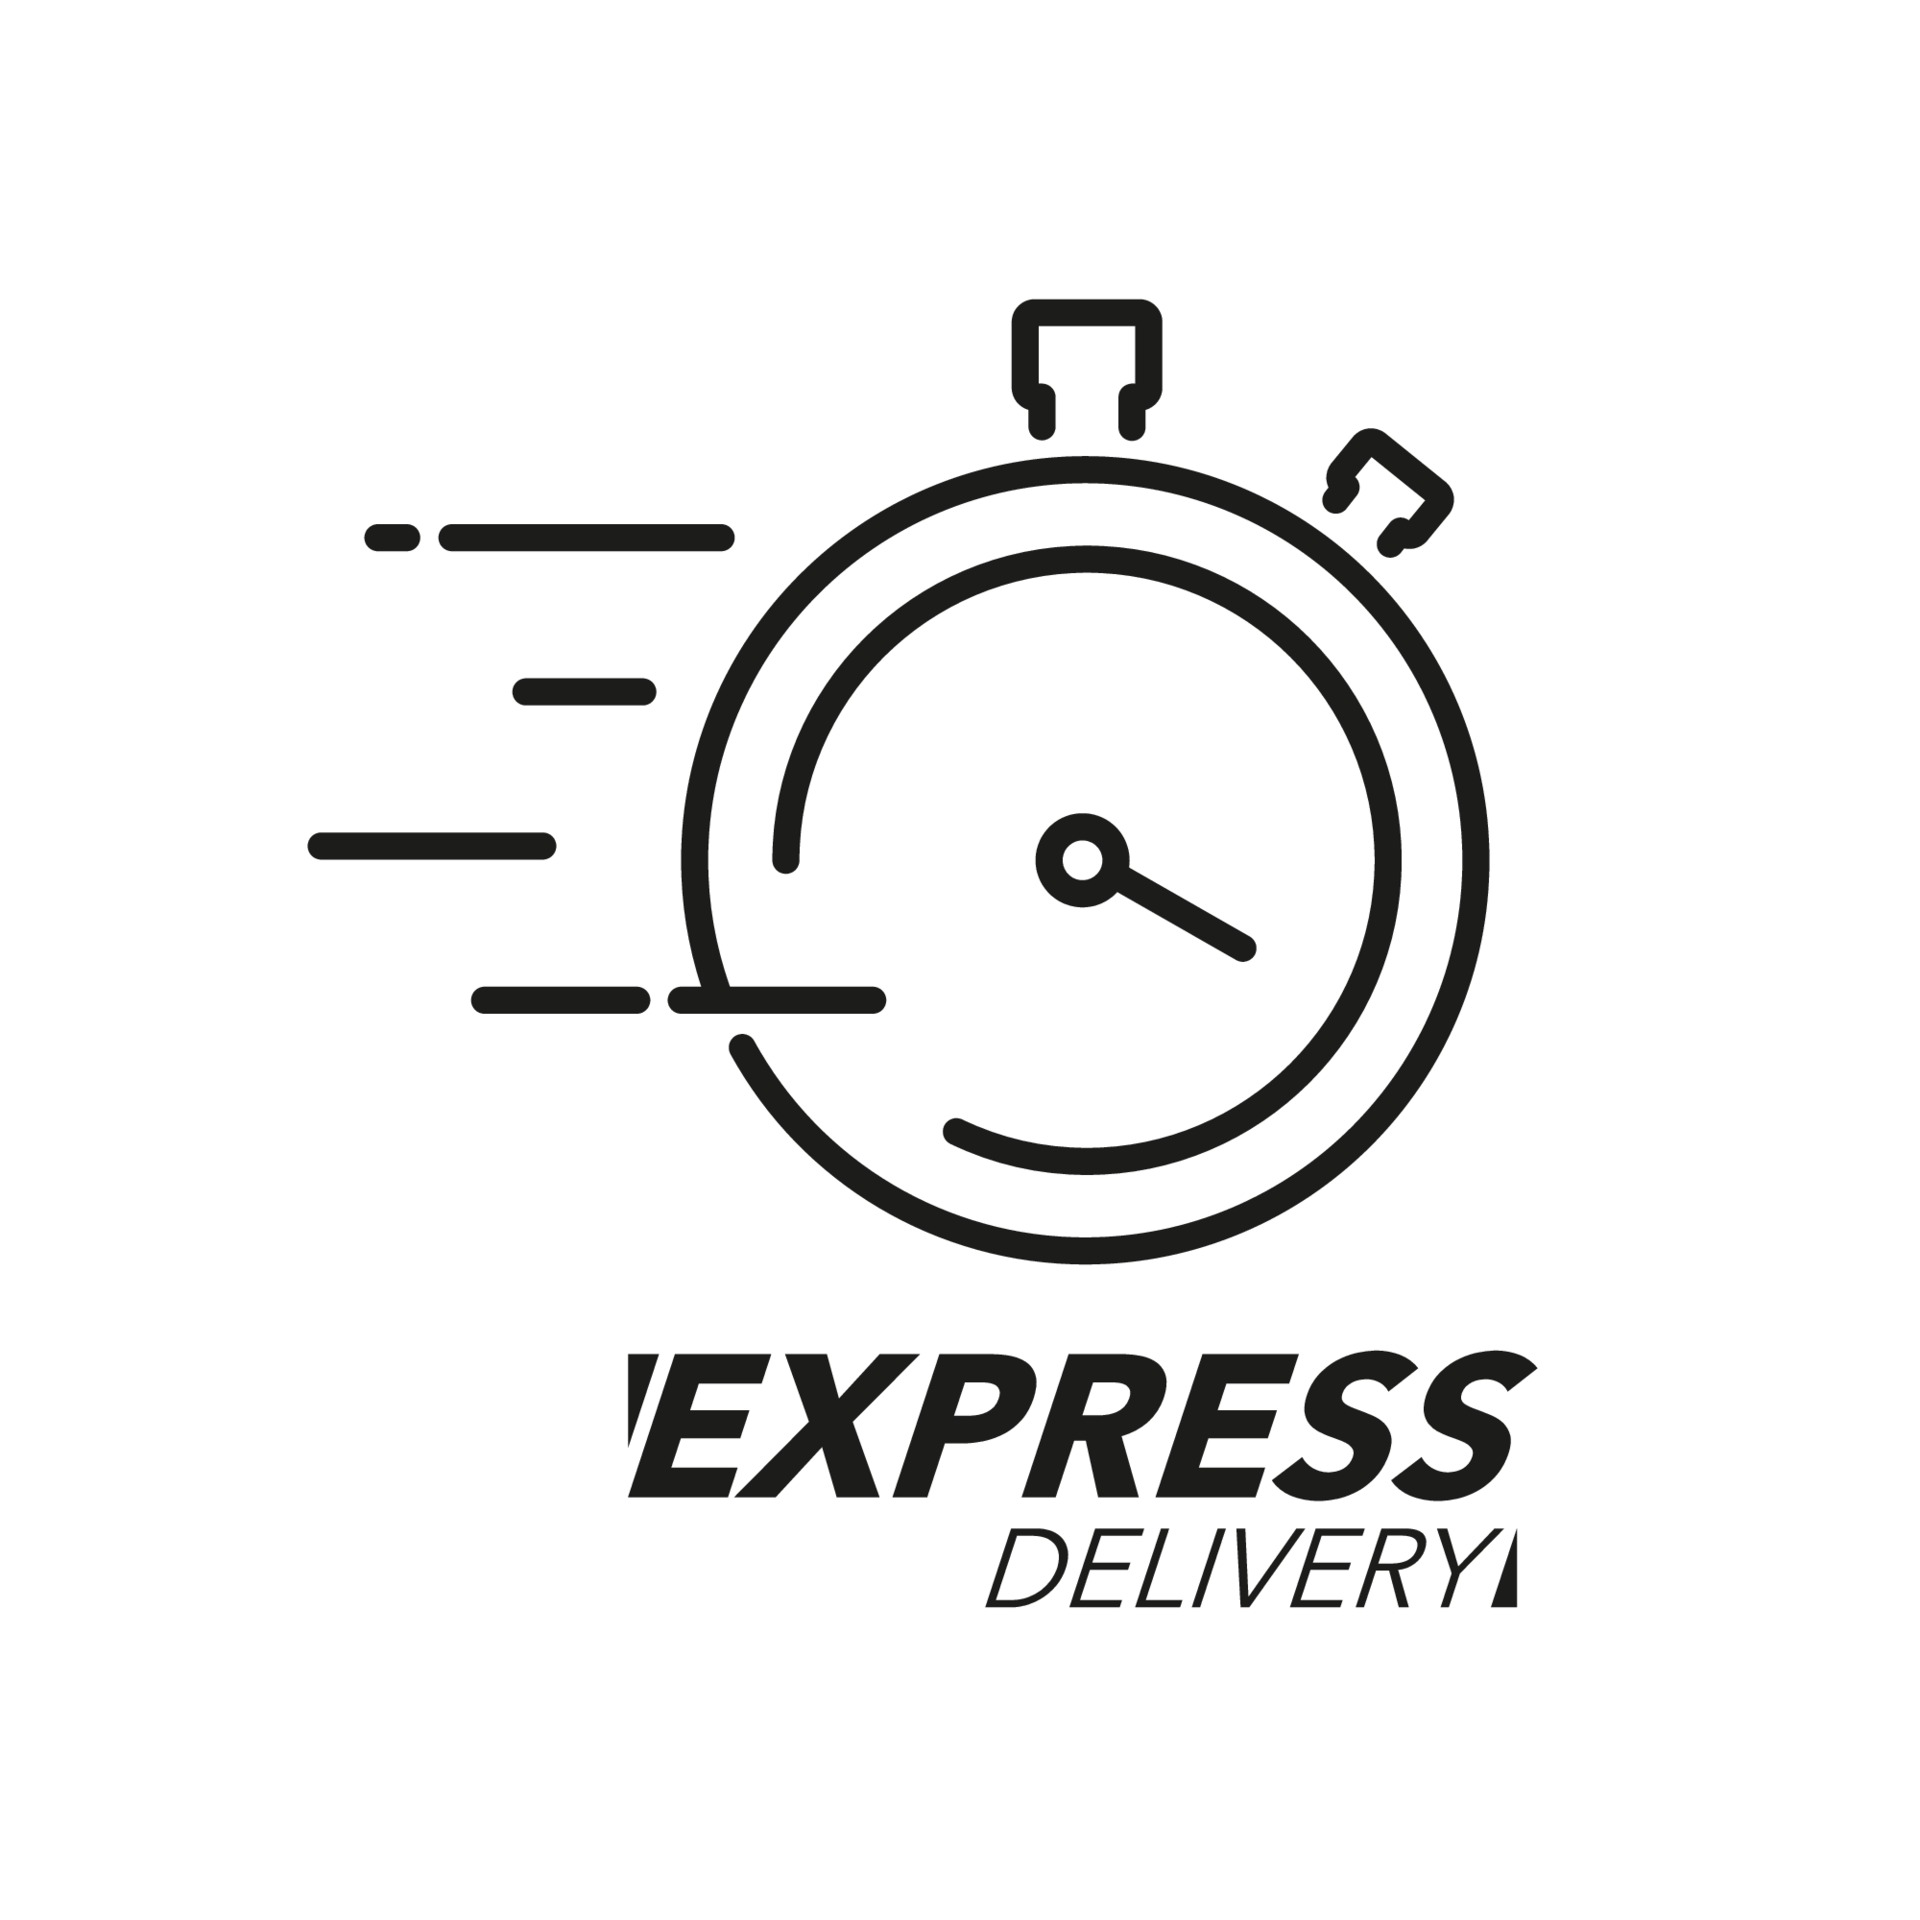 Express delivery icon concept. Stop watch icon for service, order